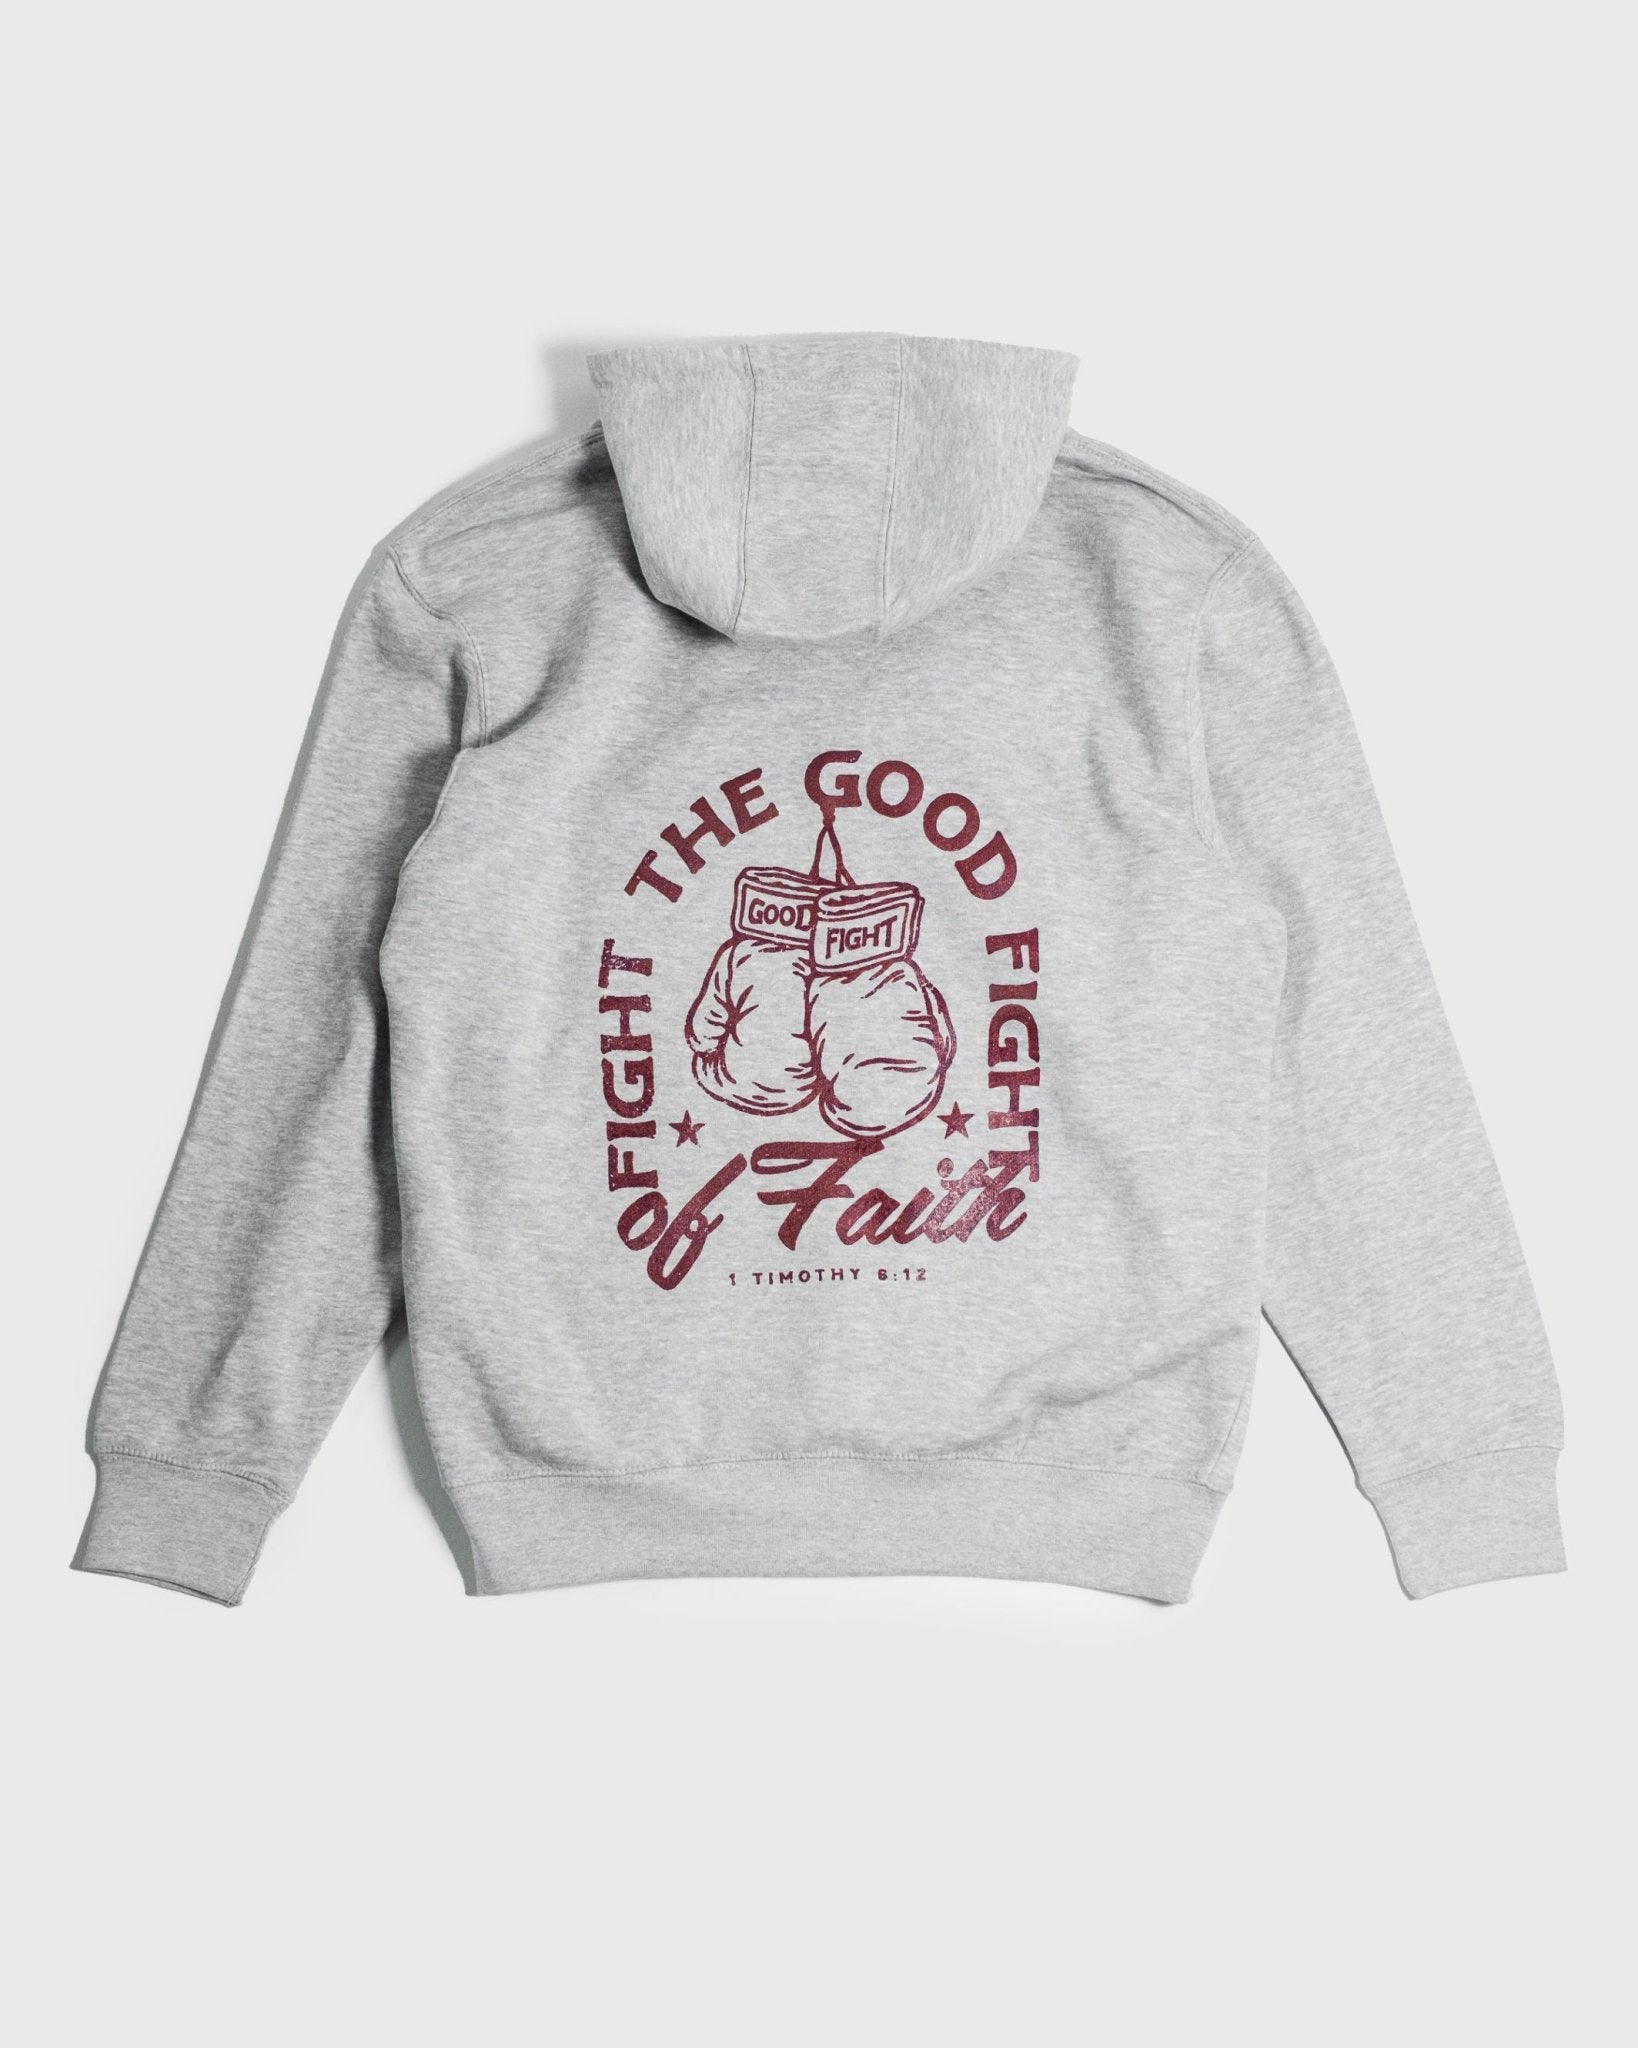 "Good Fight" Athletic Grey Zip - Up (Limited Edition) - Proclamation Coalition